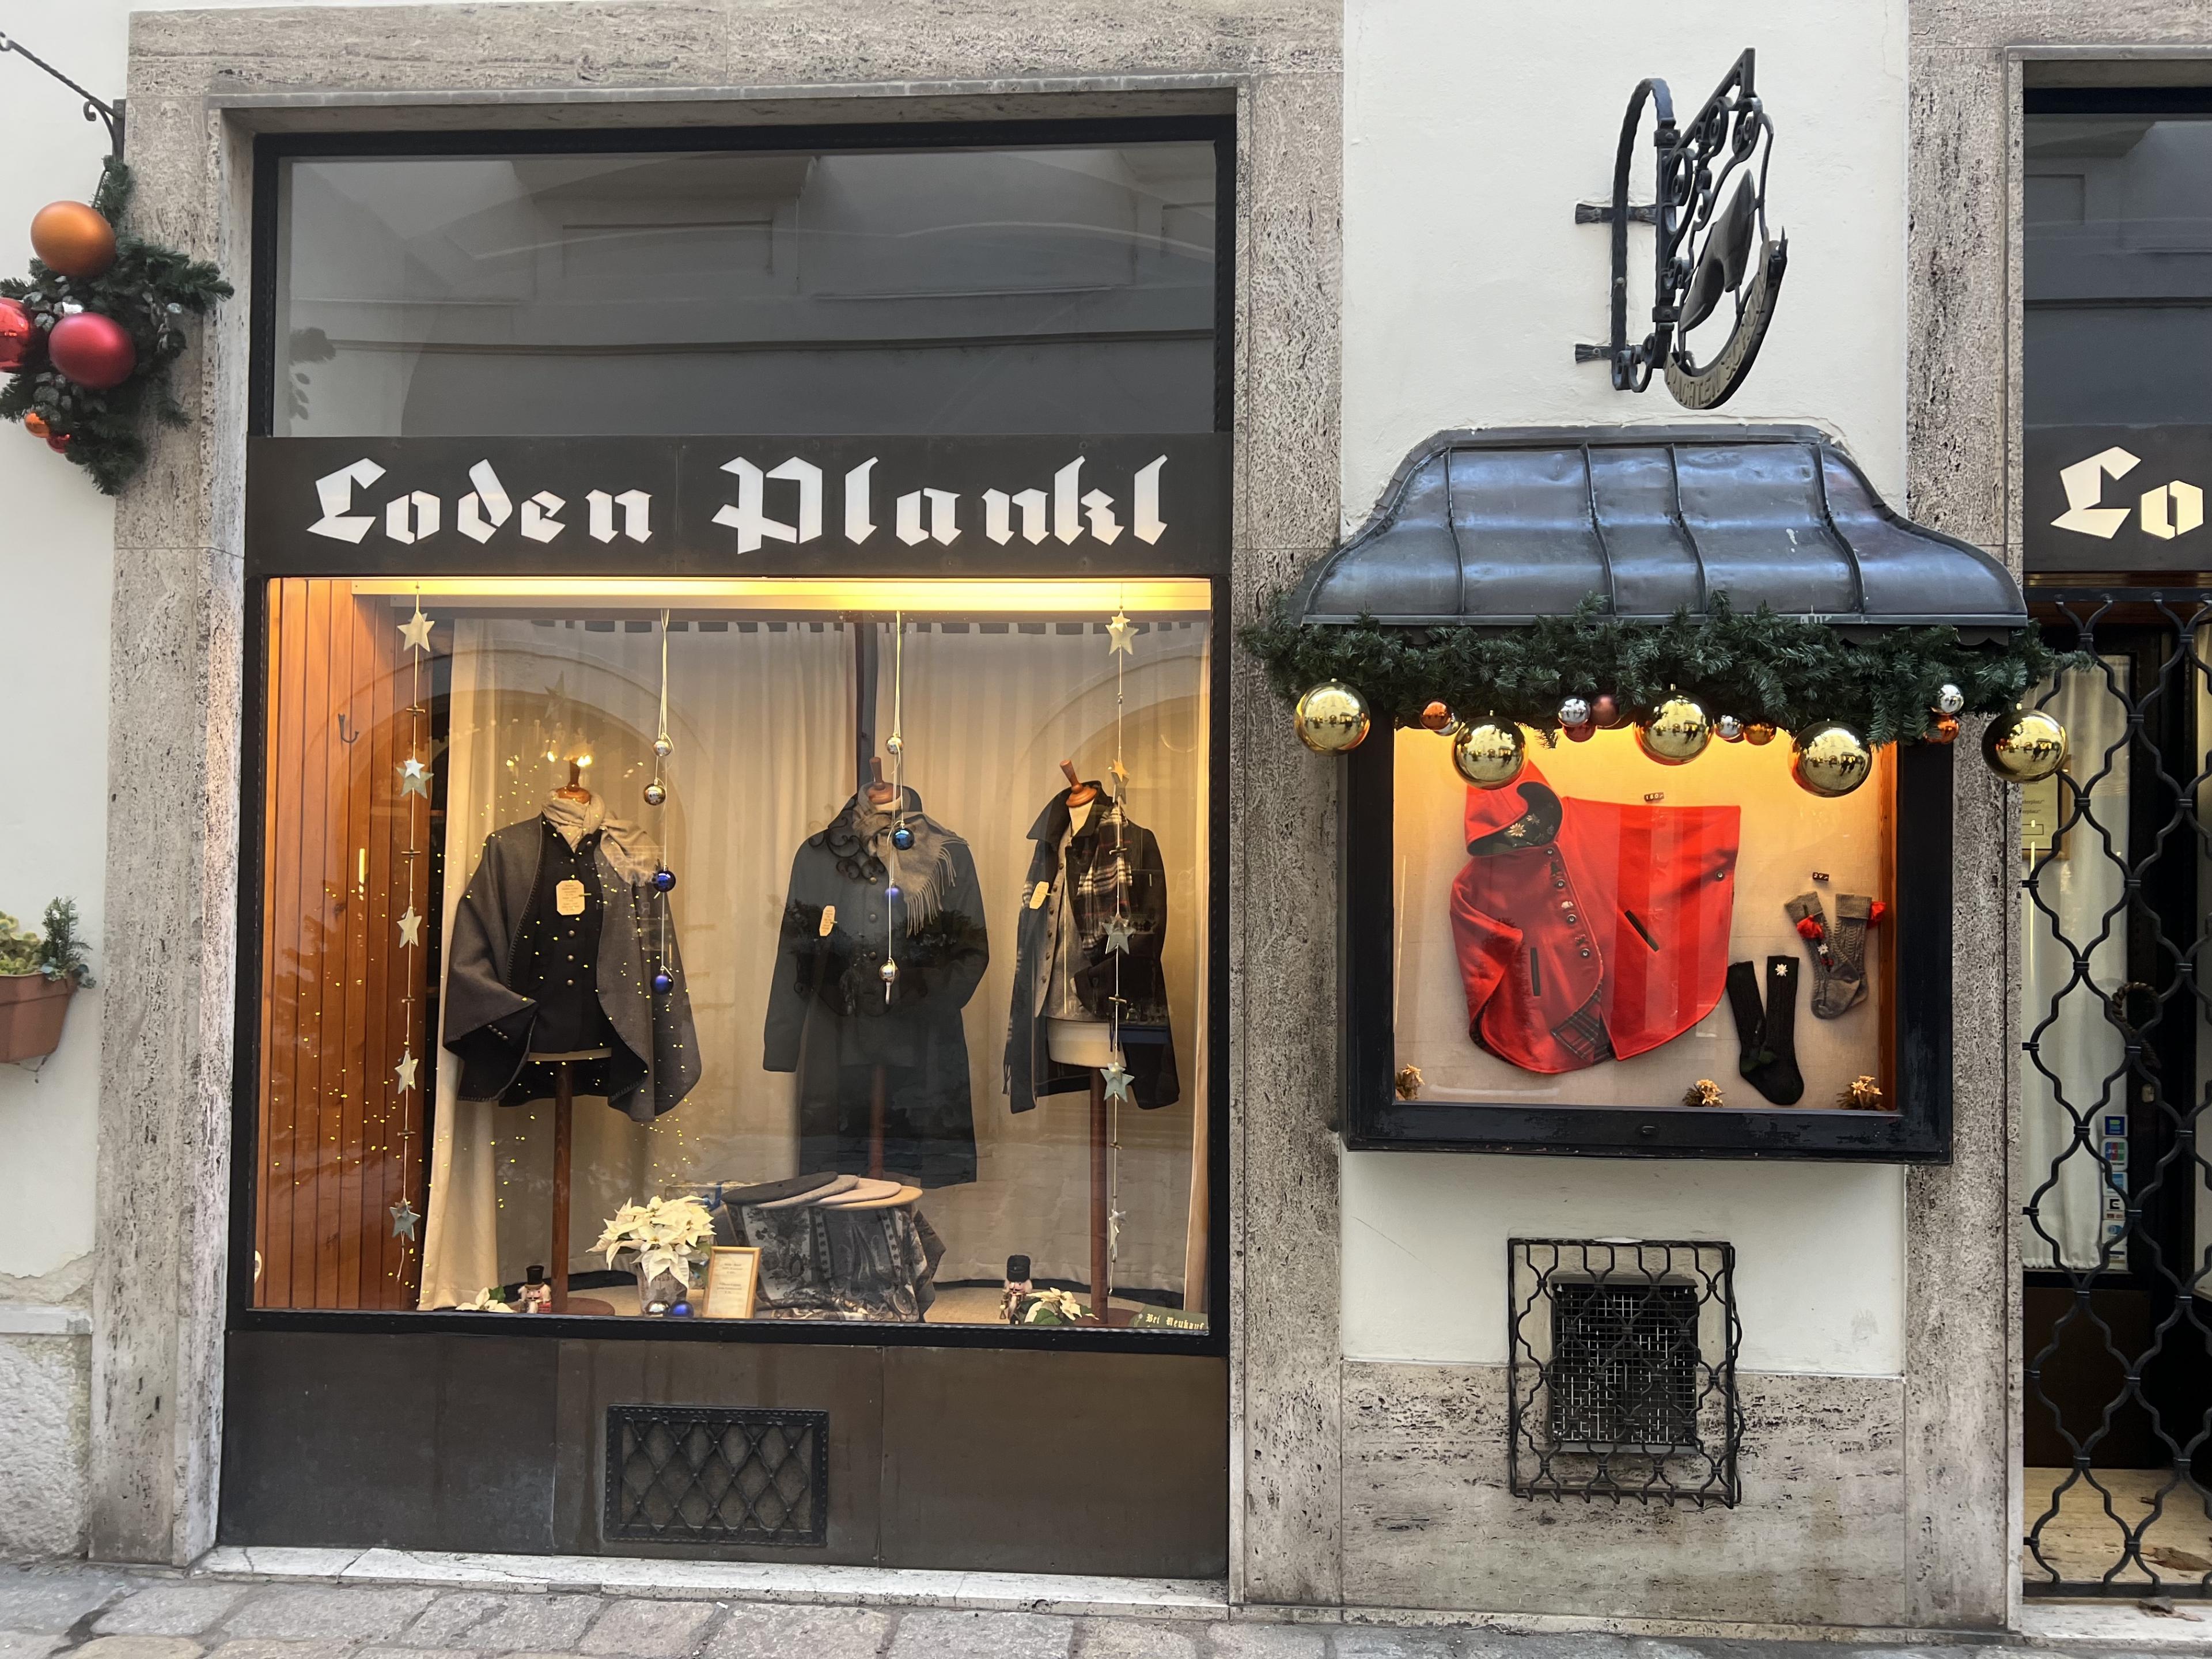 christmas window display of viennese clothing store loden plankl